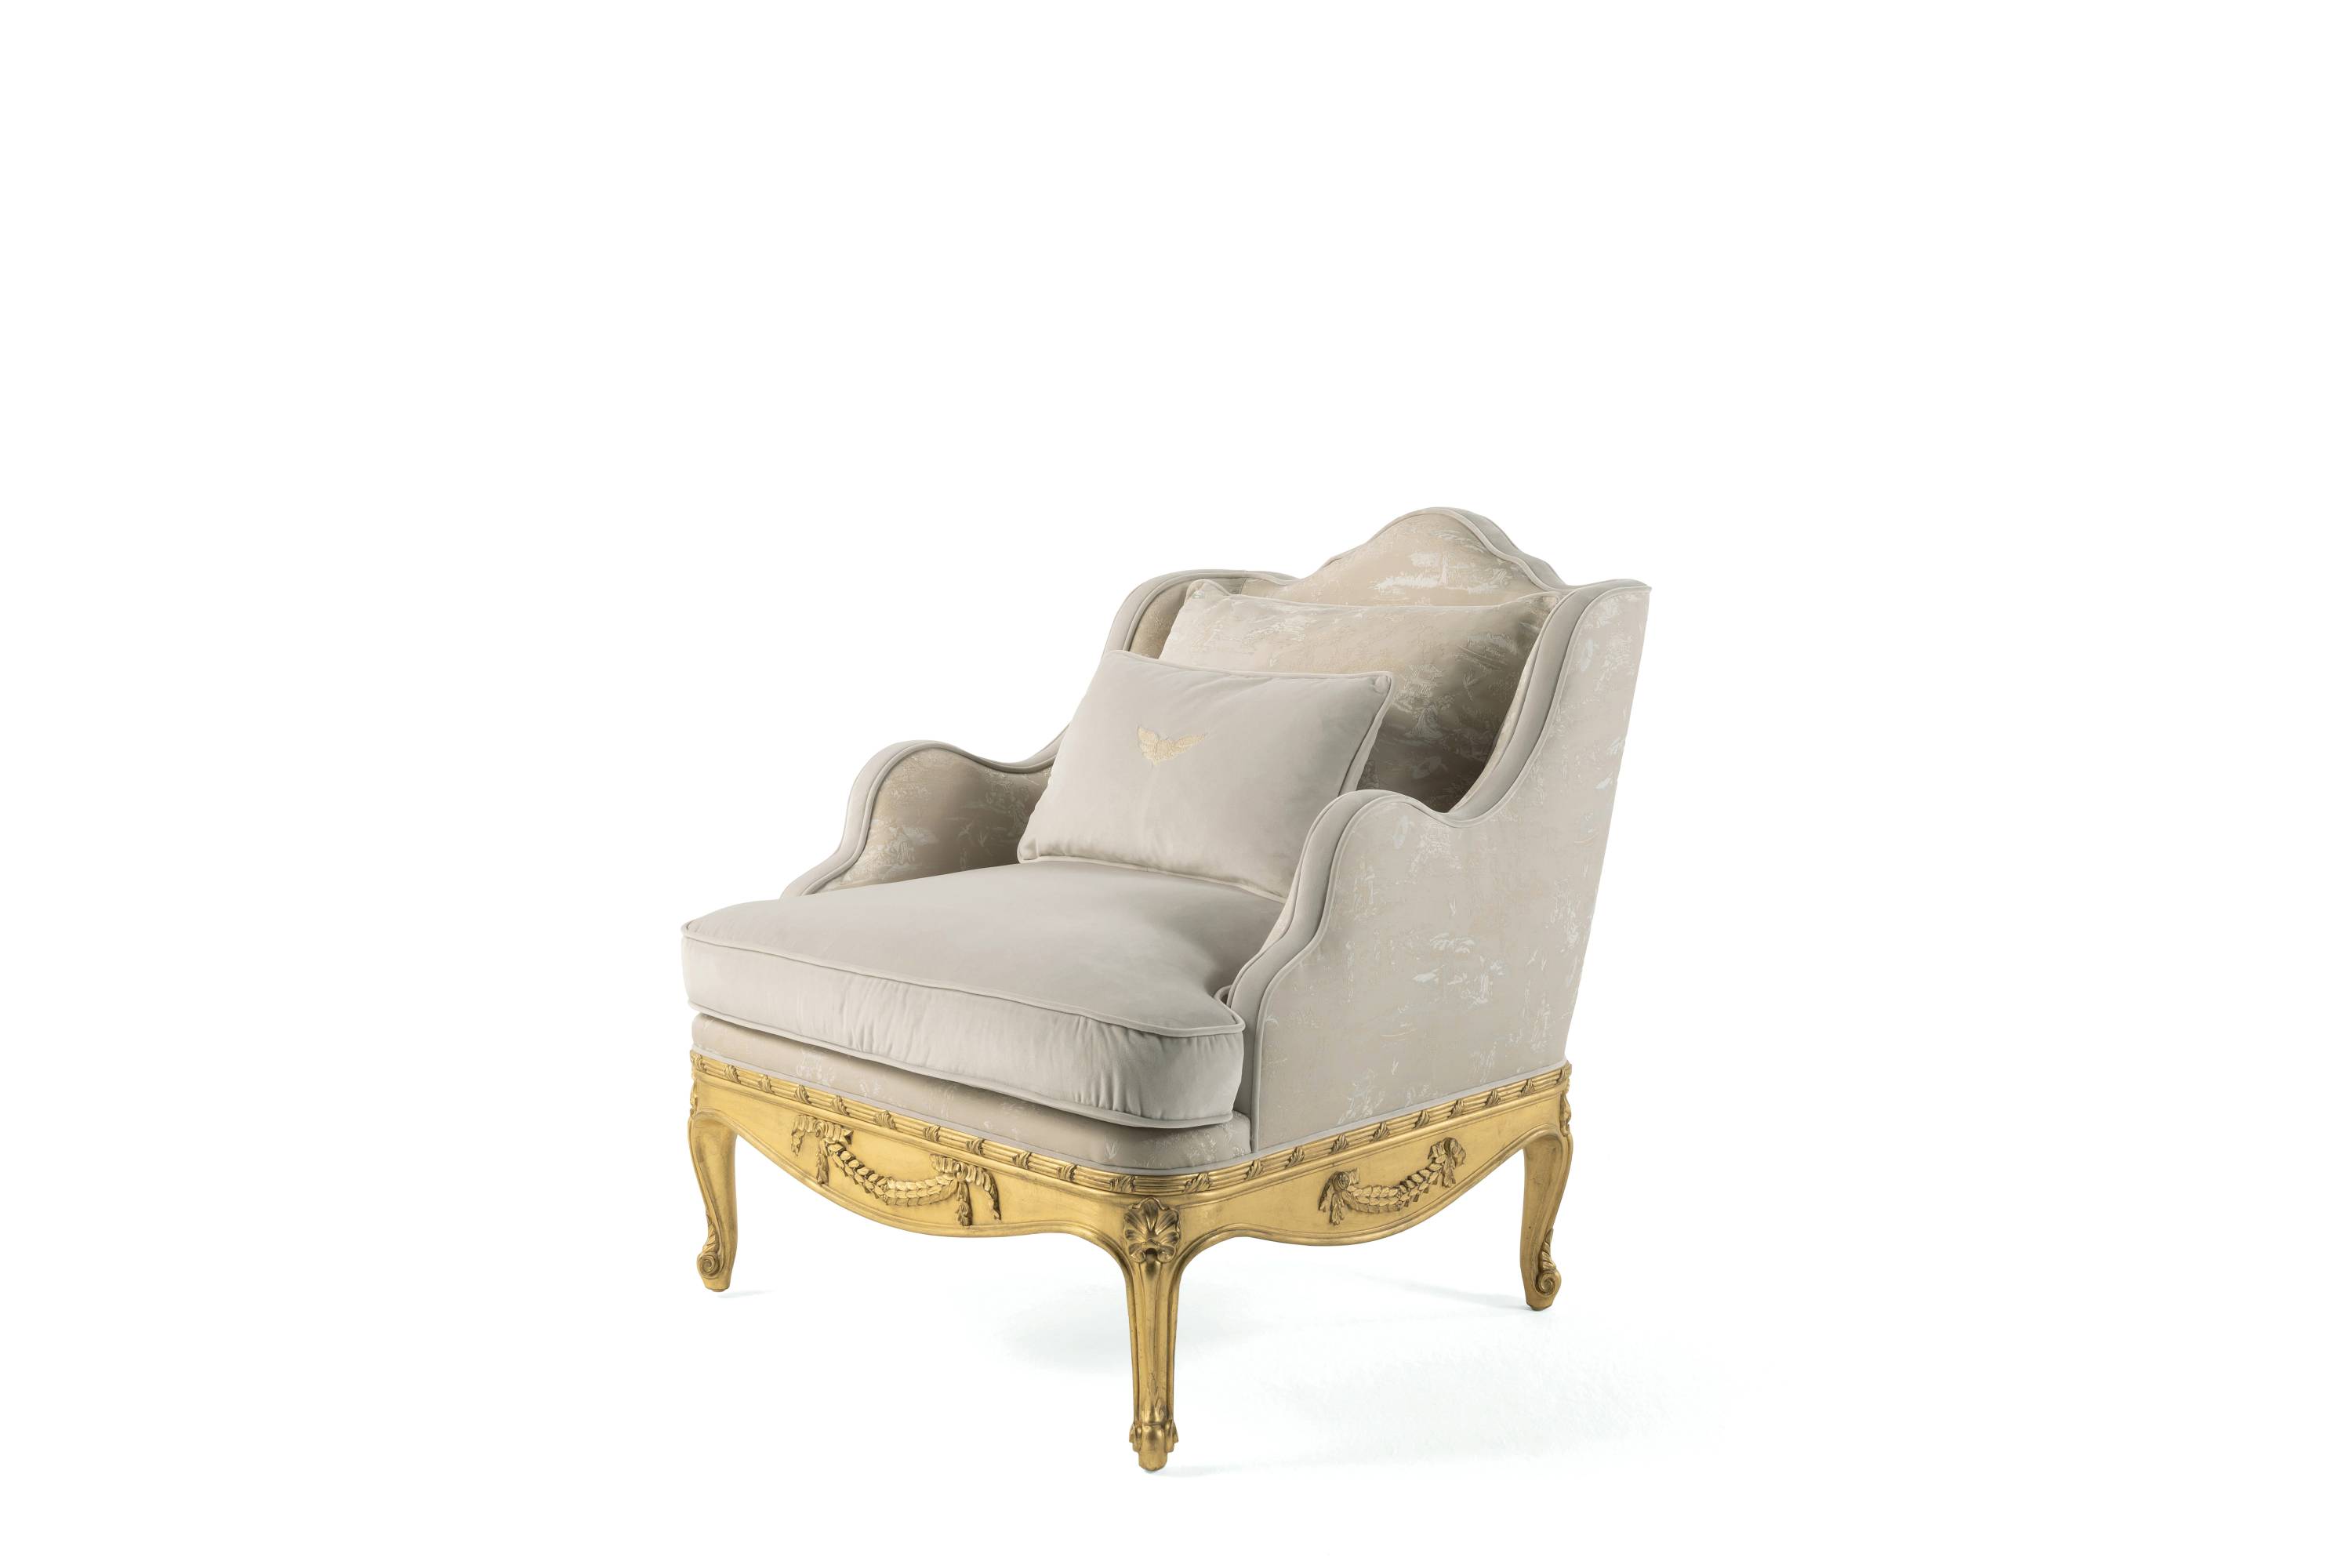 VERVEINE armchair - Discover the elegance of luxury Héritage collection by Jumbo collection